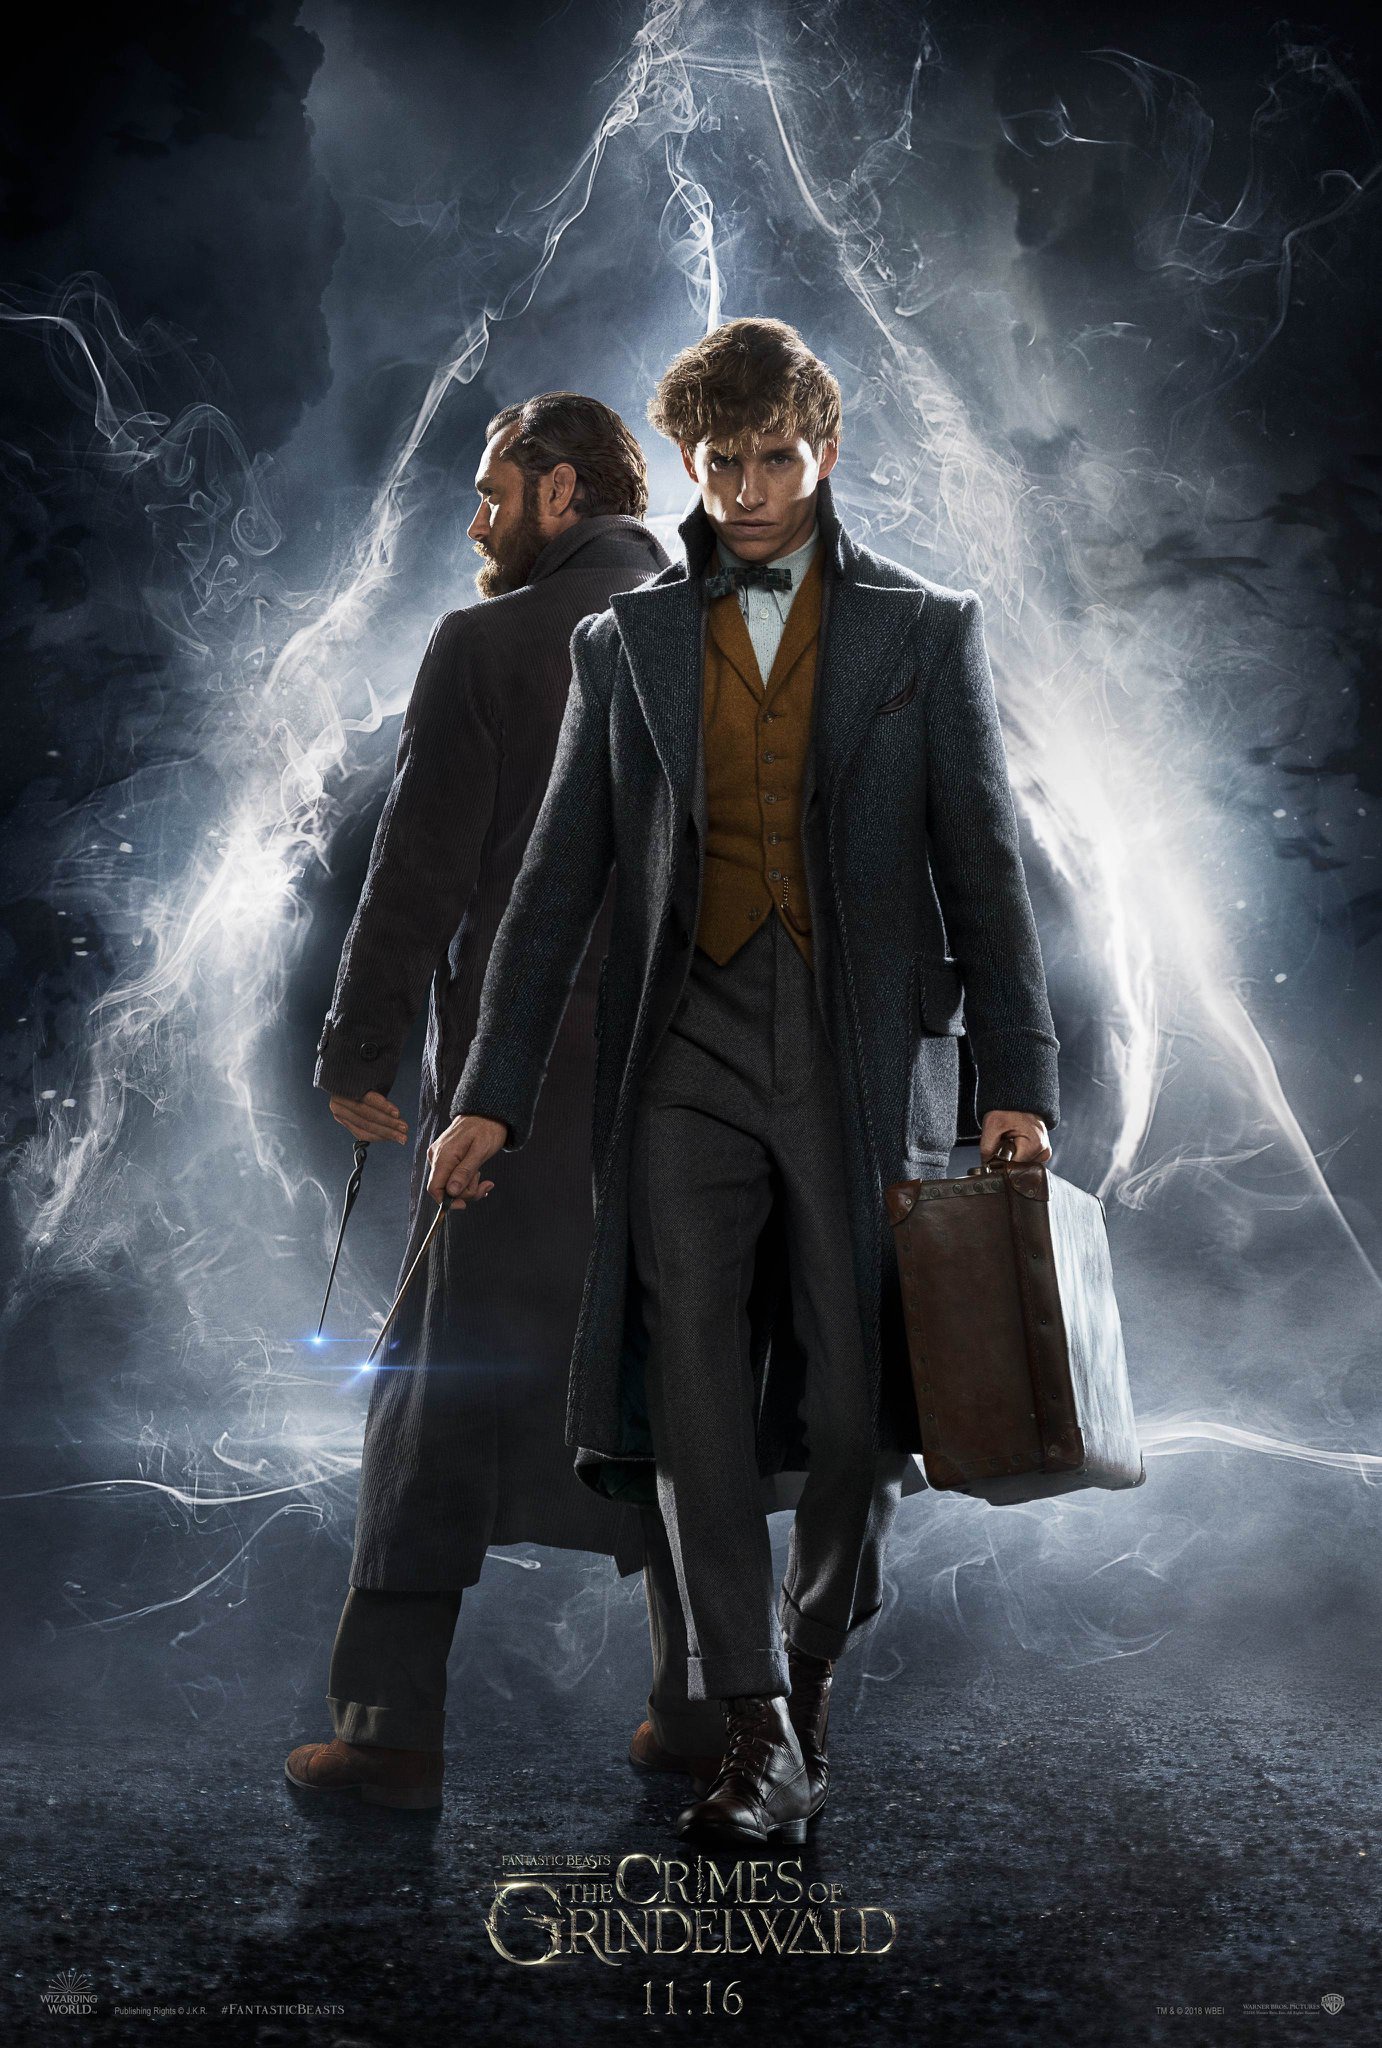 Fantastic Beasts: The Crimes Of Grindelwald film review: mediocre beasts?